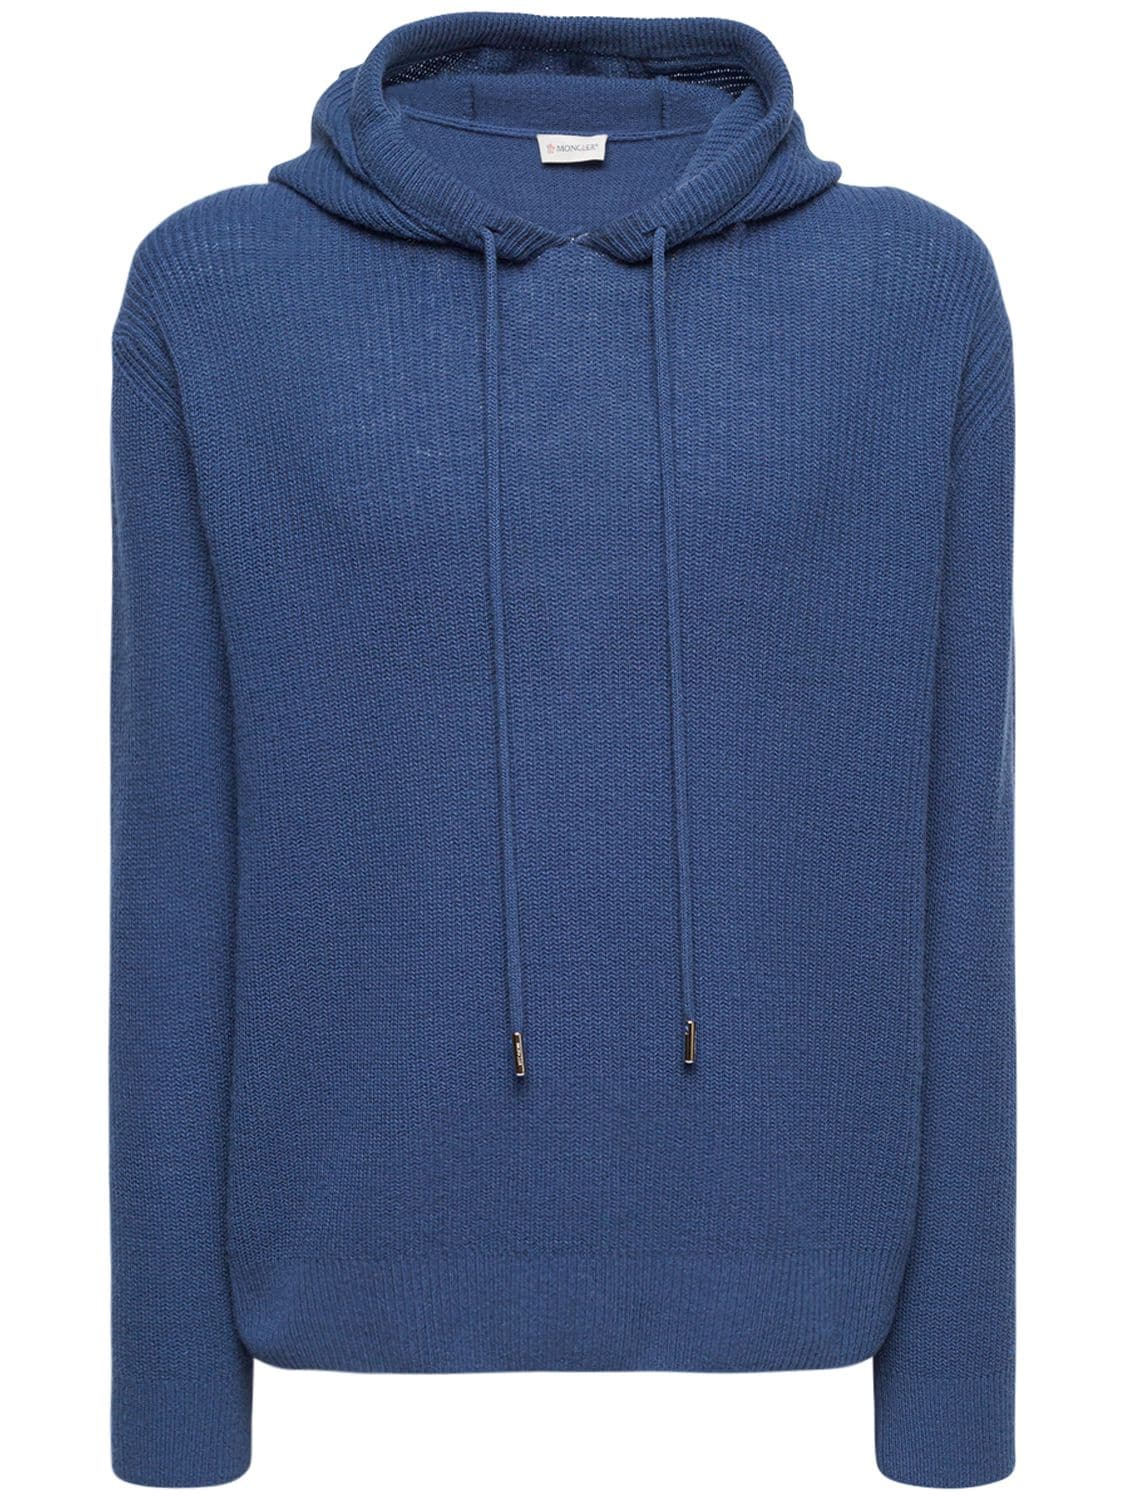 MONCLER Wool & Cashmere Knit Hoodie